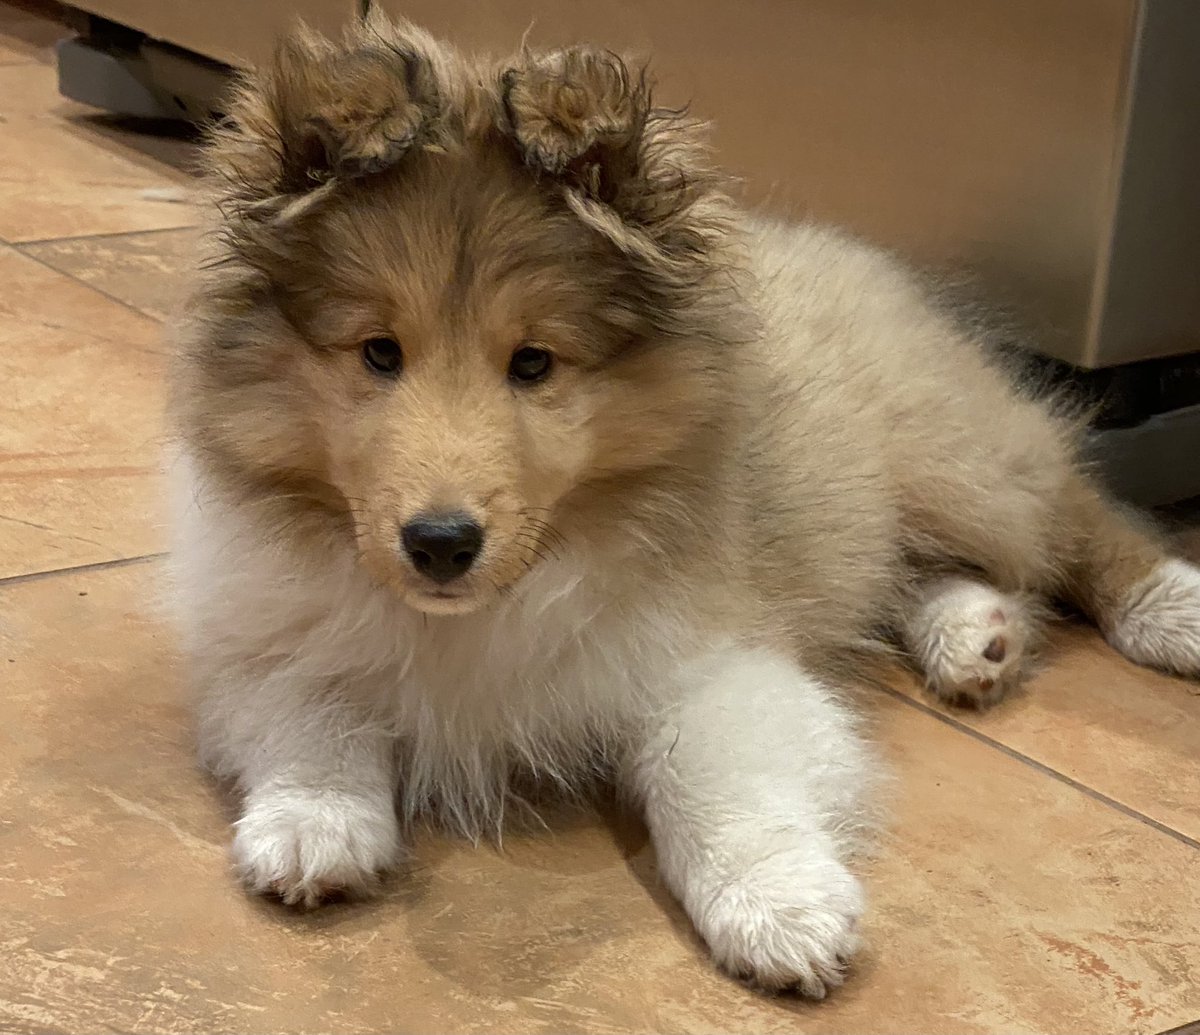 Mom gave me a bath and now she’s saying something about a brush. I don’t know what that is, but I hope it’s better than a bath! Love, Baby Kai ❤️🐾❤️ #dogsofX #puppylove #sheltie